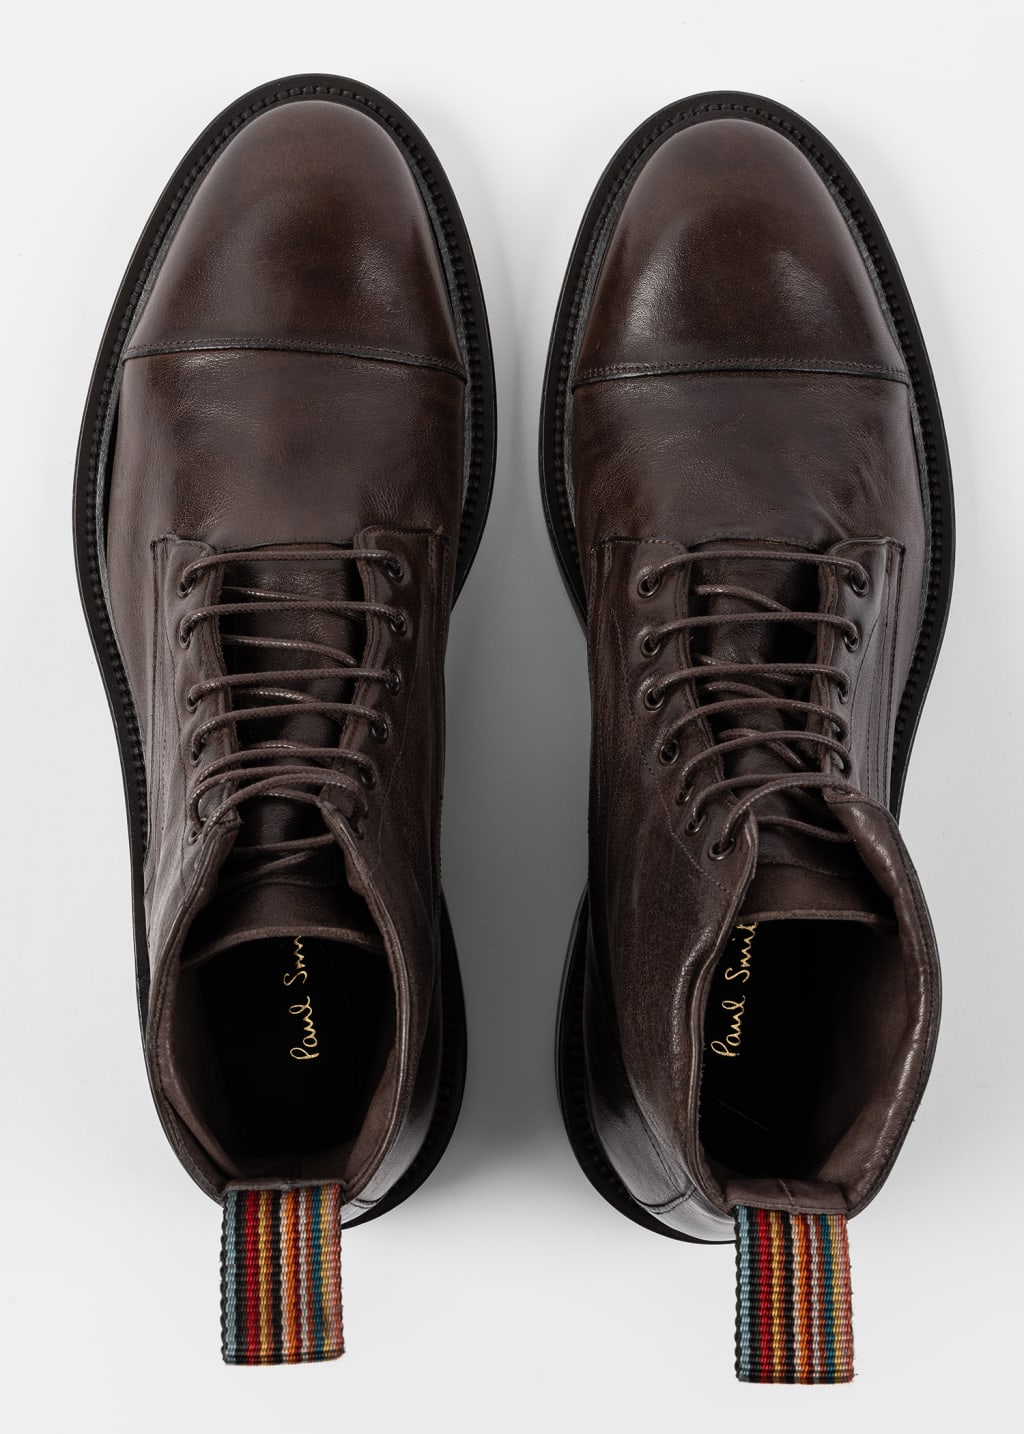 Pair View - Dark Brown Leather 'Newland' Boots Paul Smith